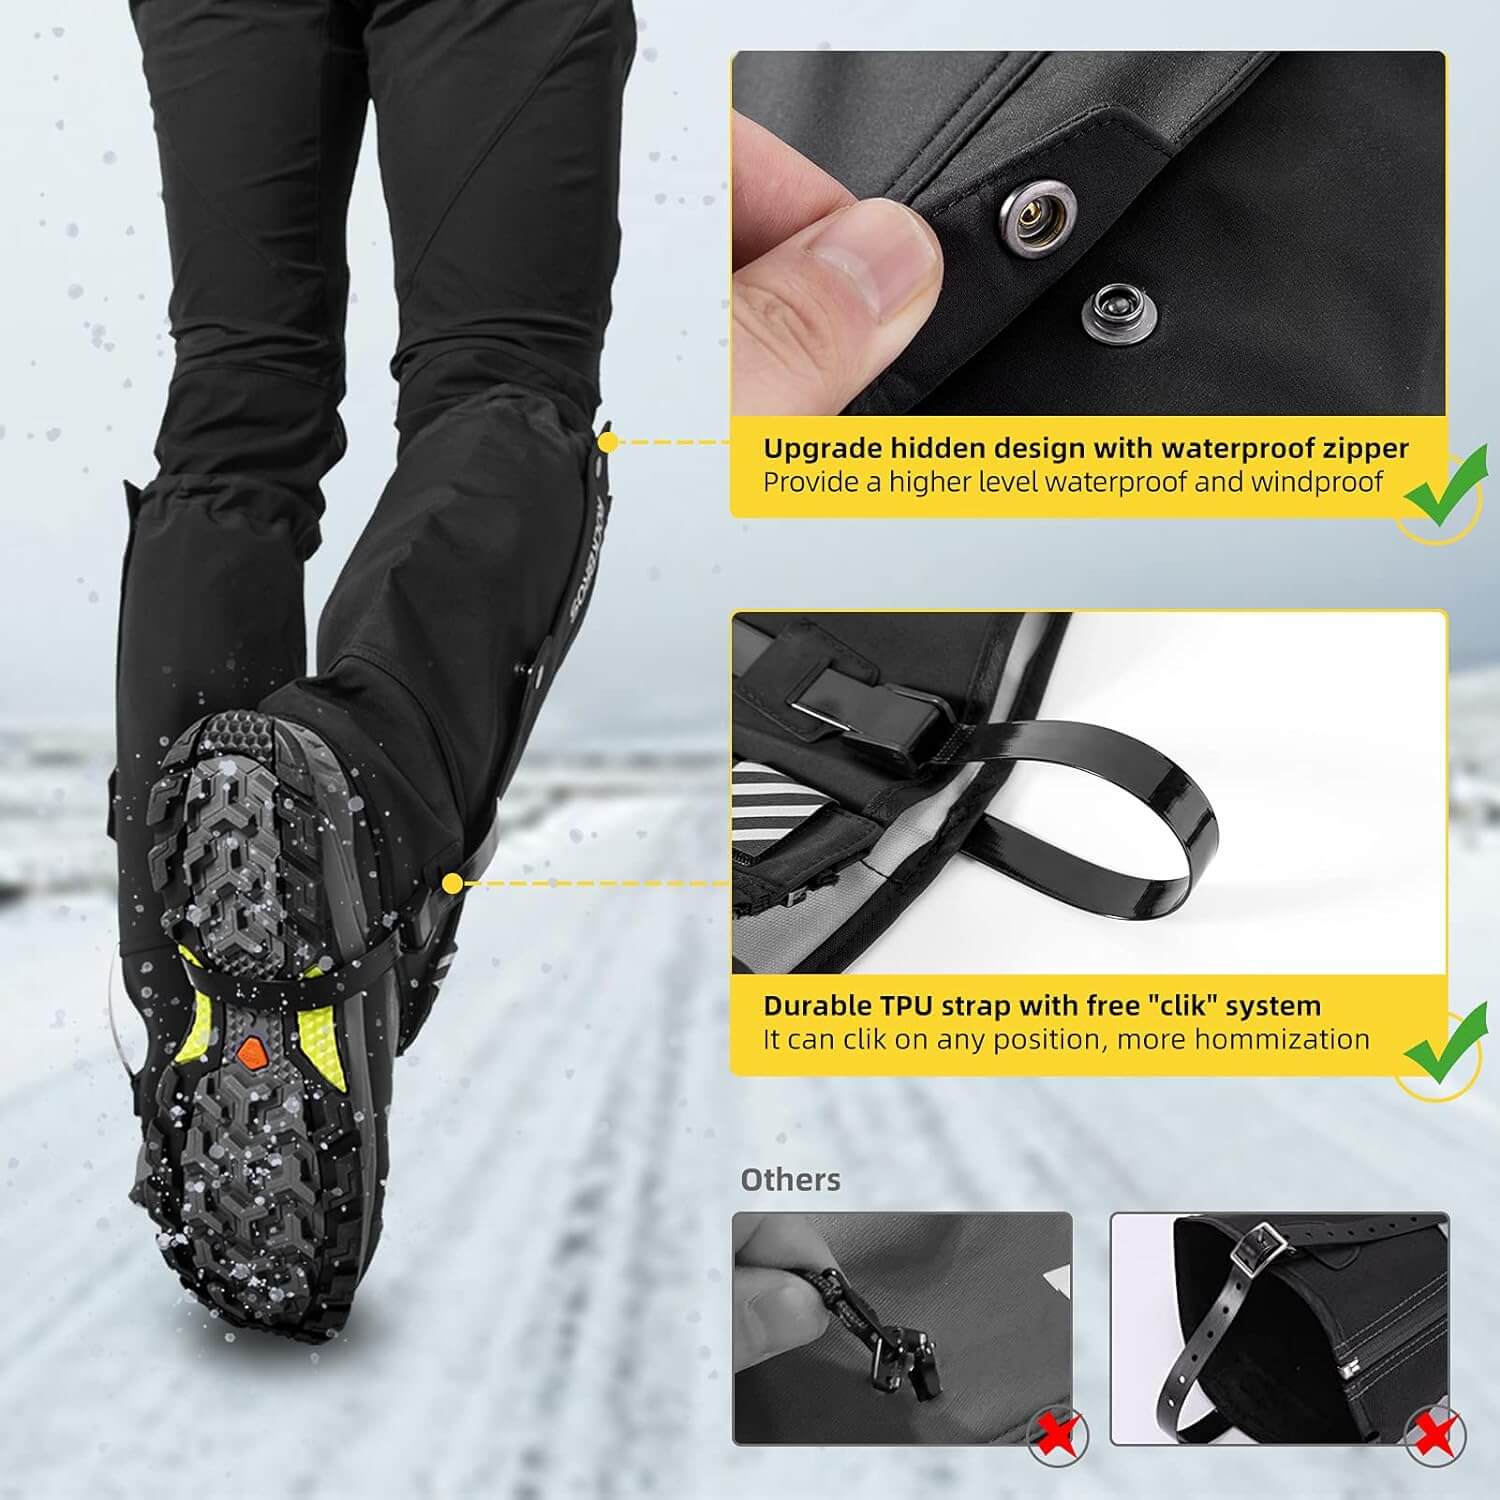 Shop The Latest >ROCKBROS Snow Boot Leg Gaiters Waterproof Hiking Gaiters > *Only $33.99*> From The Top Brand > *Rockbrosl* > Shop Now and Get Free Shipping On Orders Over $45.00 >*Shop Earth Foot*